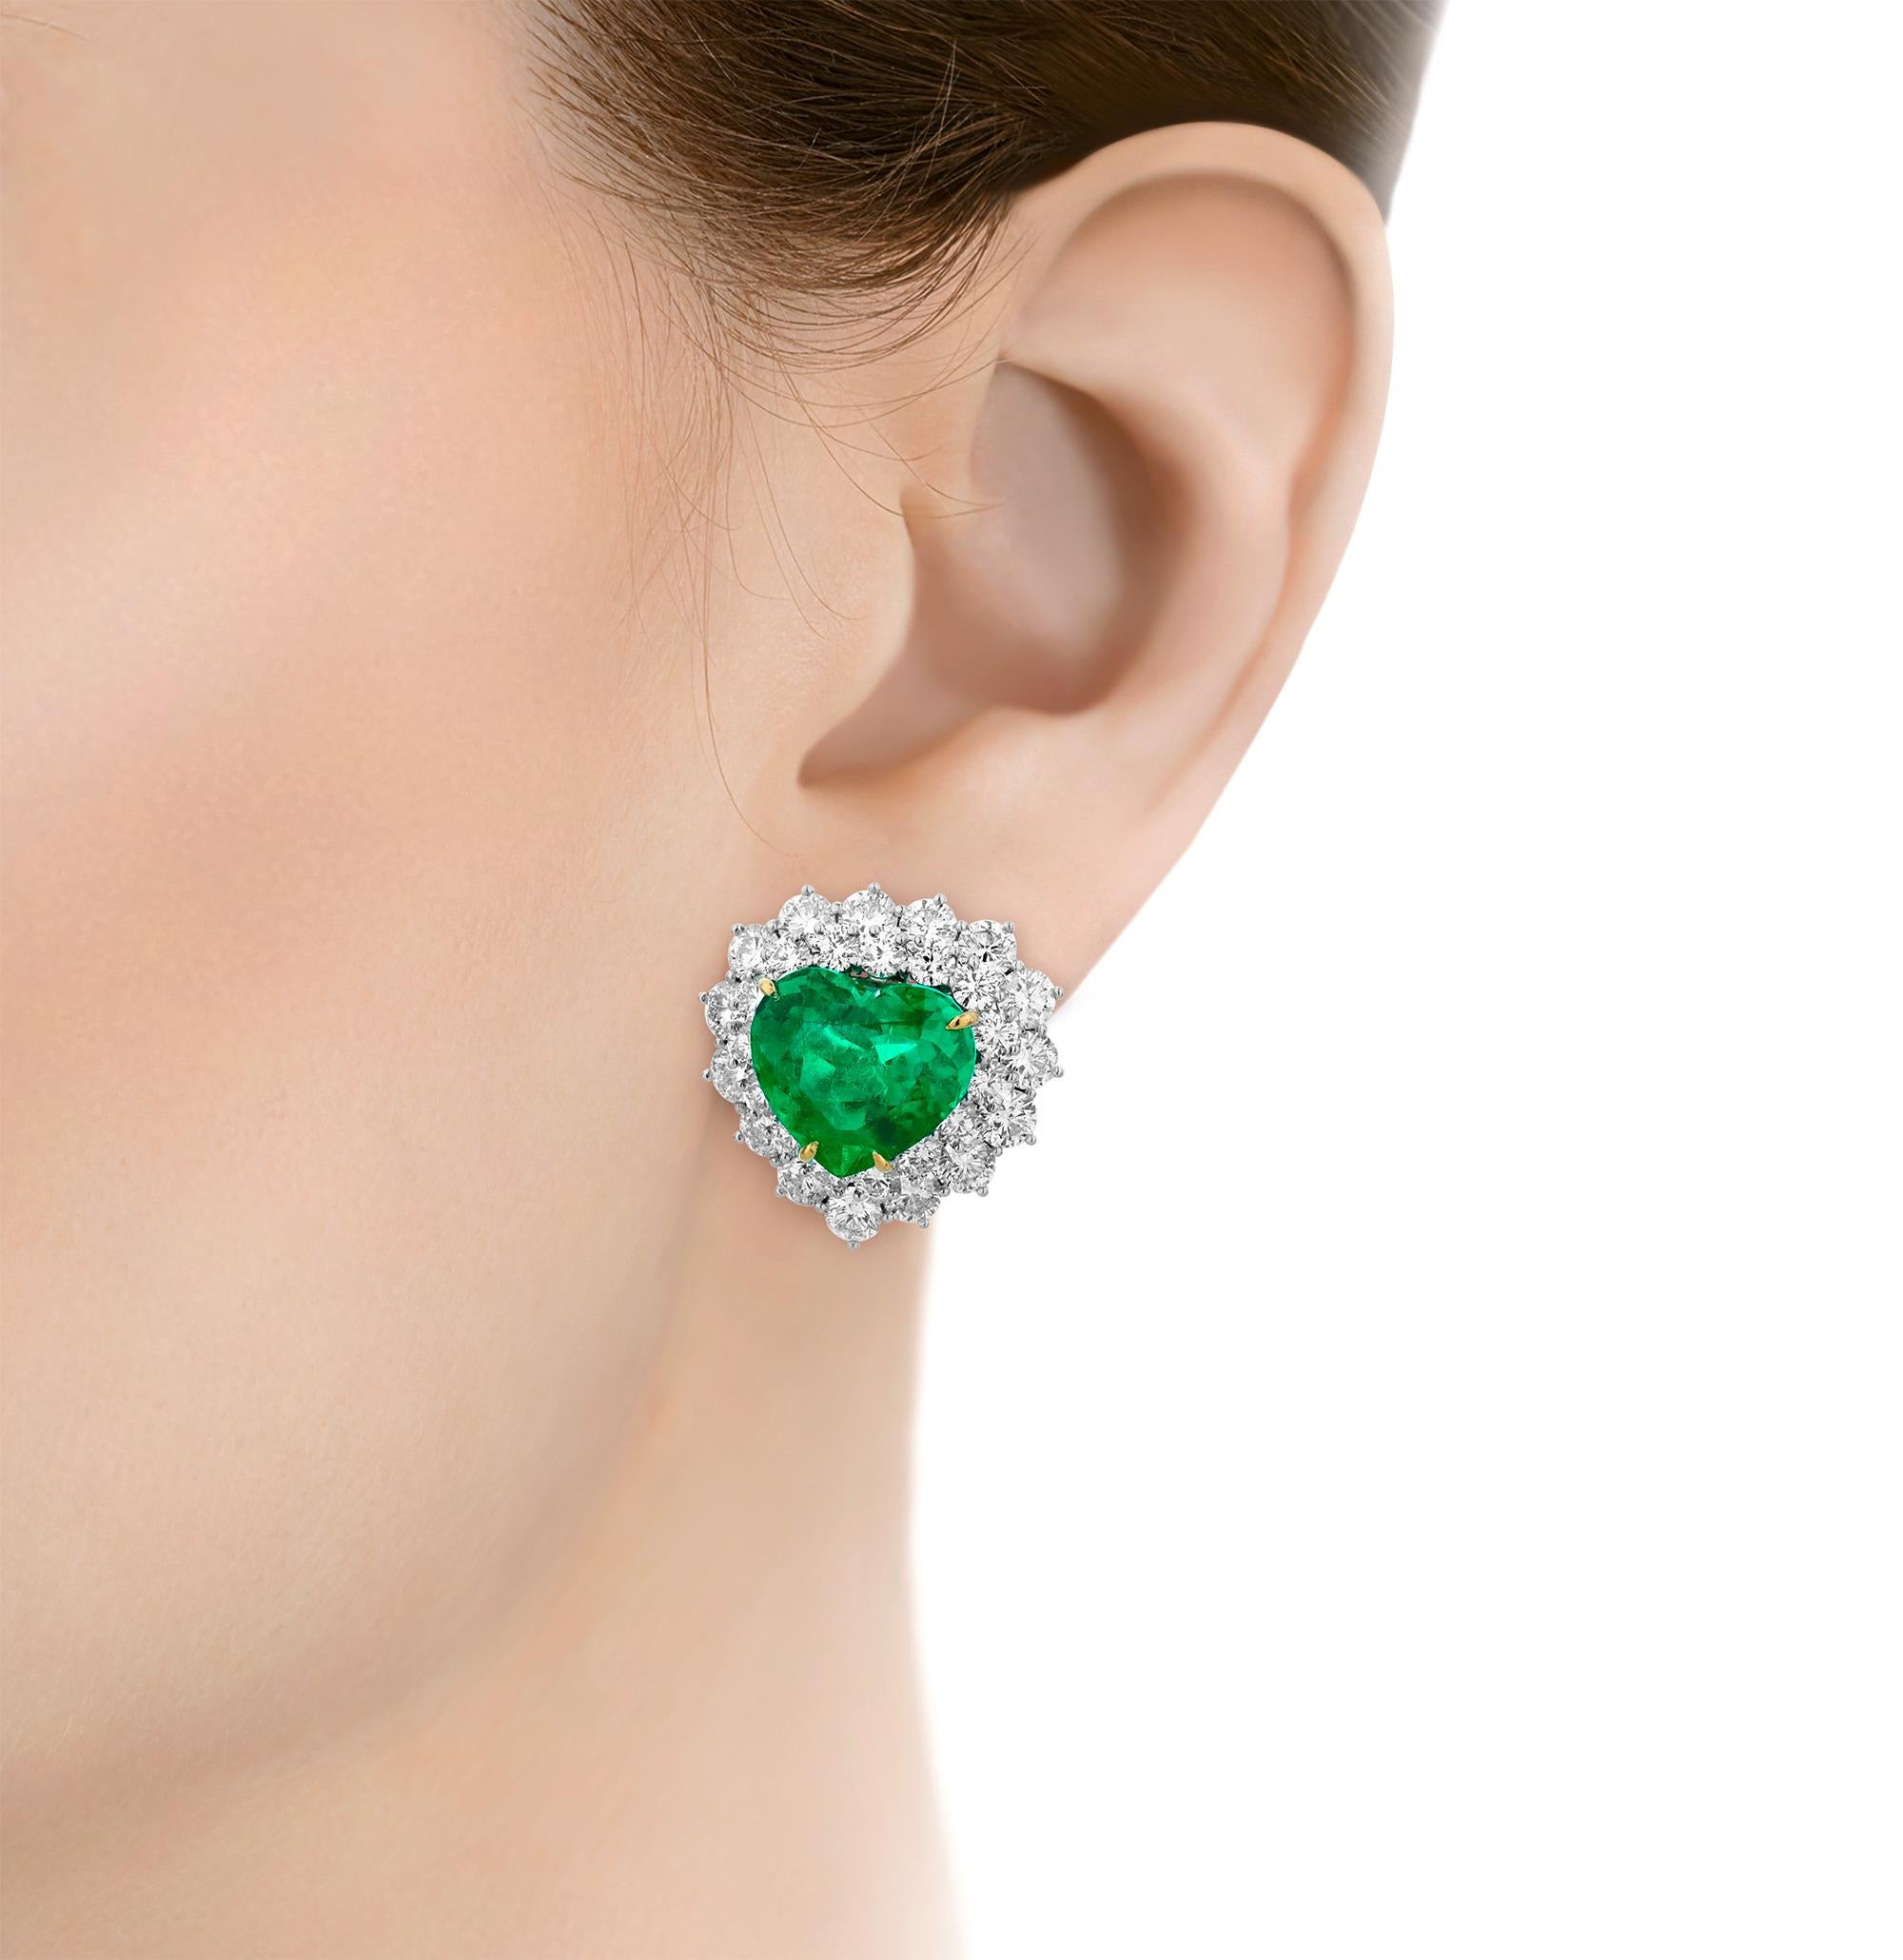 Highly rare, this stunning pair of earrings features two incredible heart-shaped Colombian emeralds. The verdant, emerald cut gems have an impressive total weight of 17.84 carats and are accompanied by a coveted certification from C. Dunaigre,